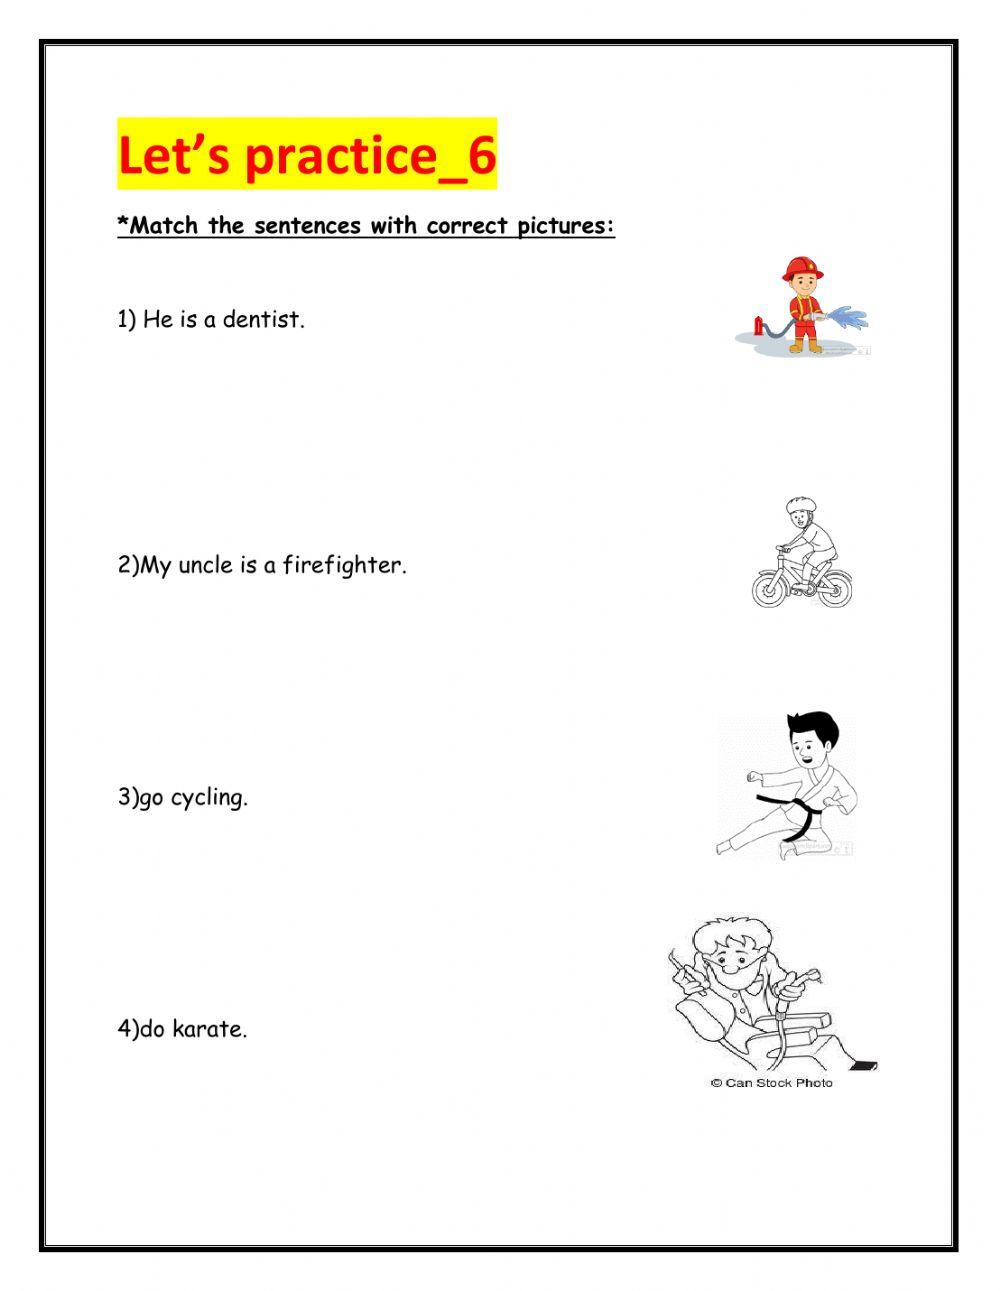 Let's practice more -6